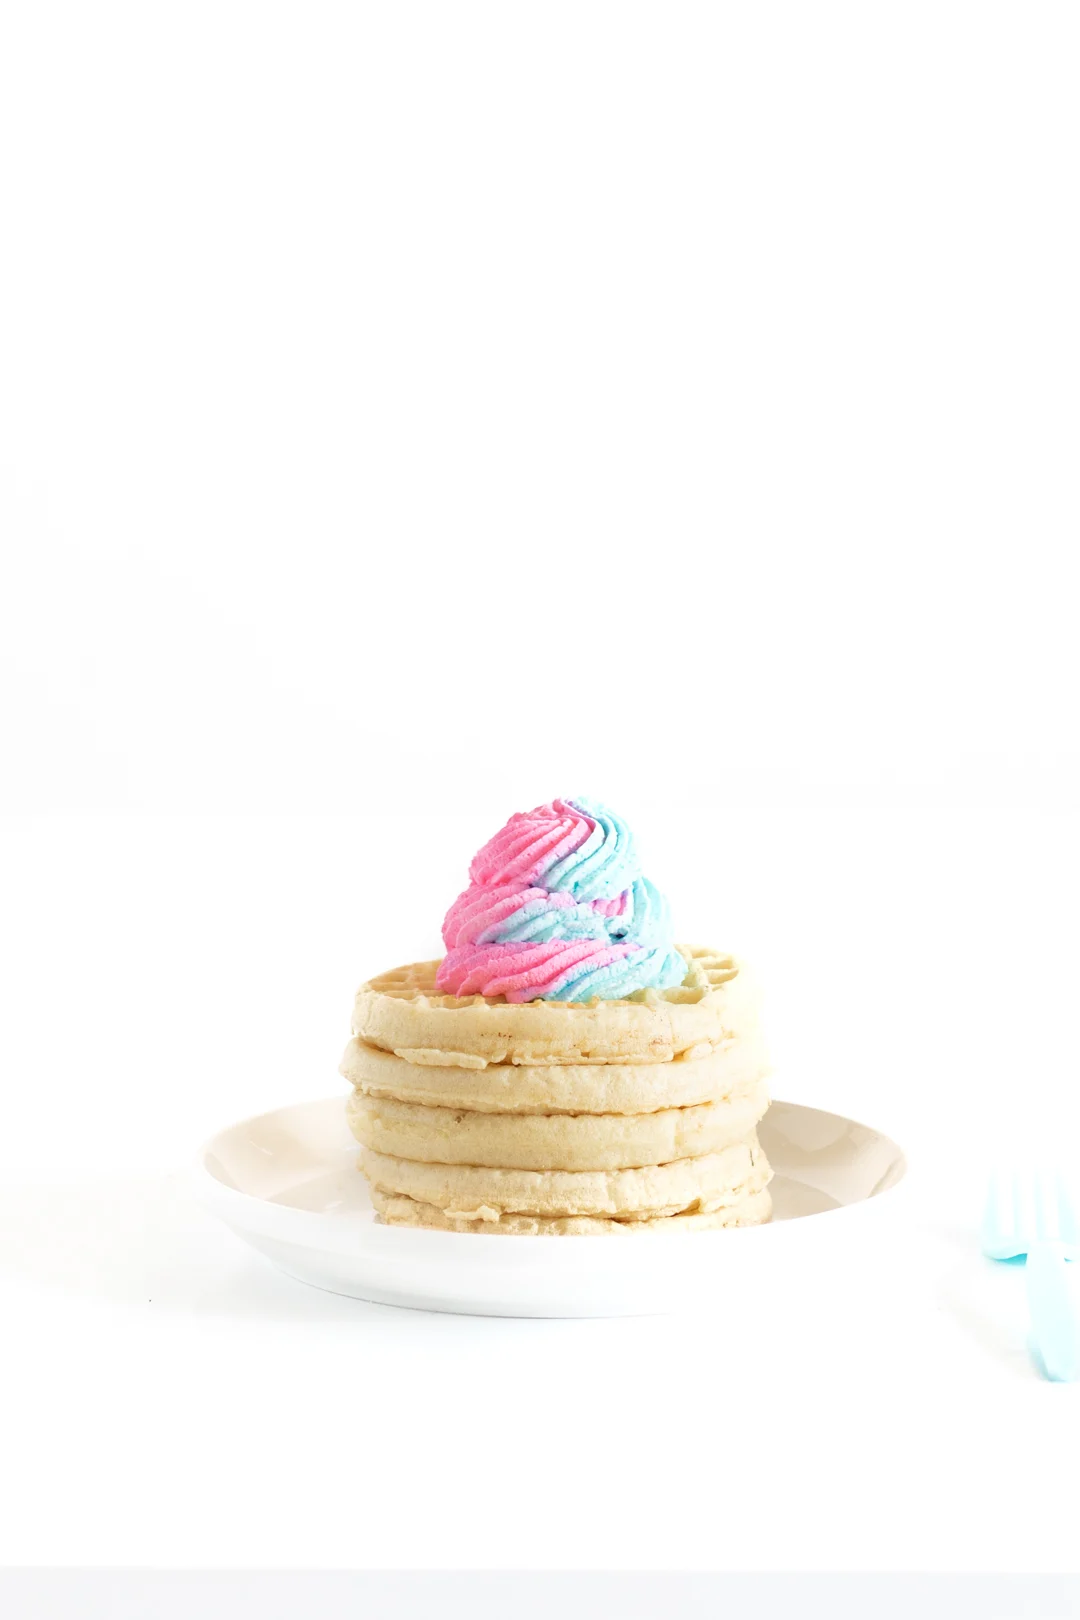 stack of waffles on a white plate with a lip topped with pink and blue swirled whipped cream